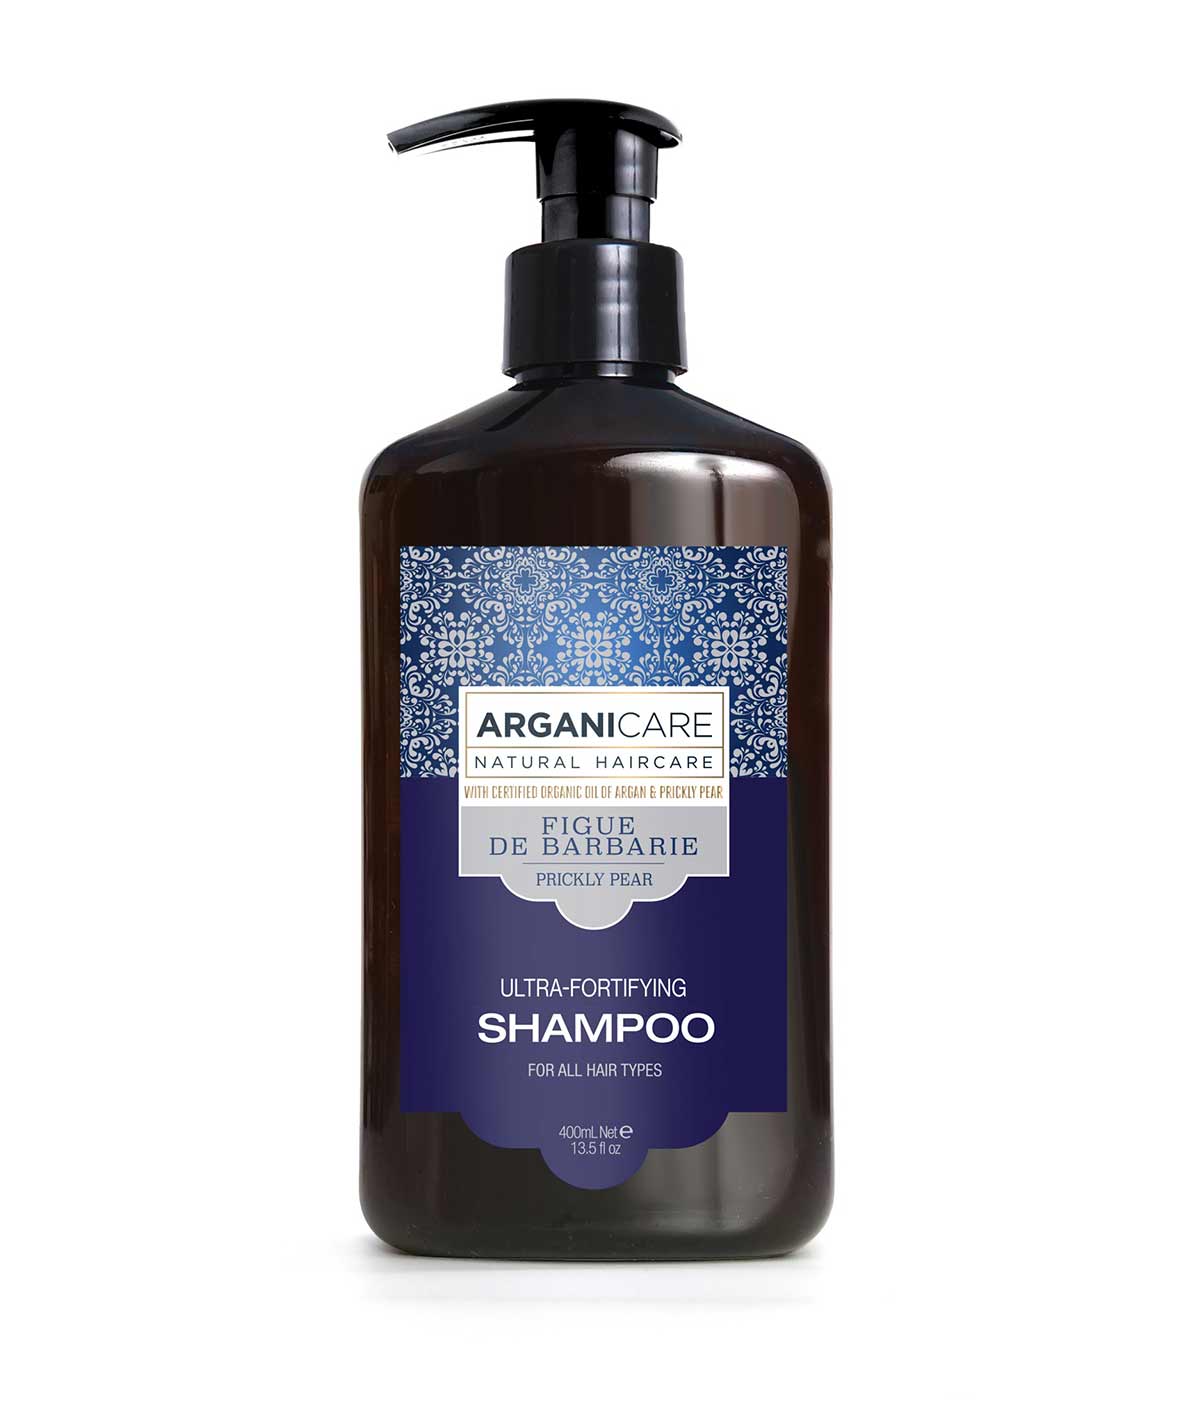 Arganicare - Prickly pear - "Ultra-fortifying" fortifying shampoo - 400 ml - Arganicare - Ethni Beauty Market